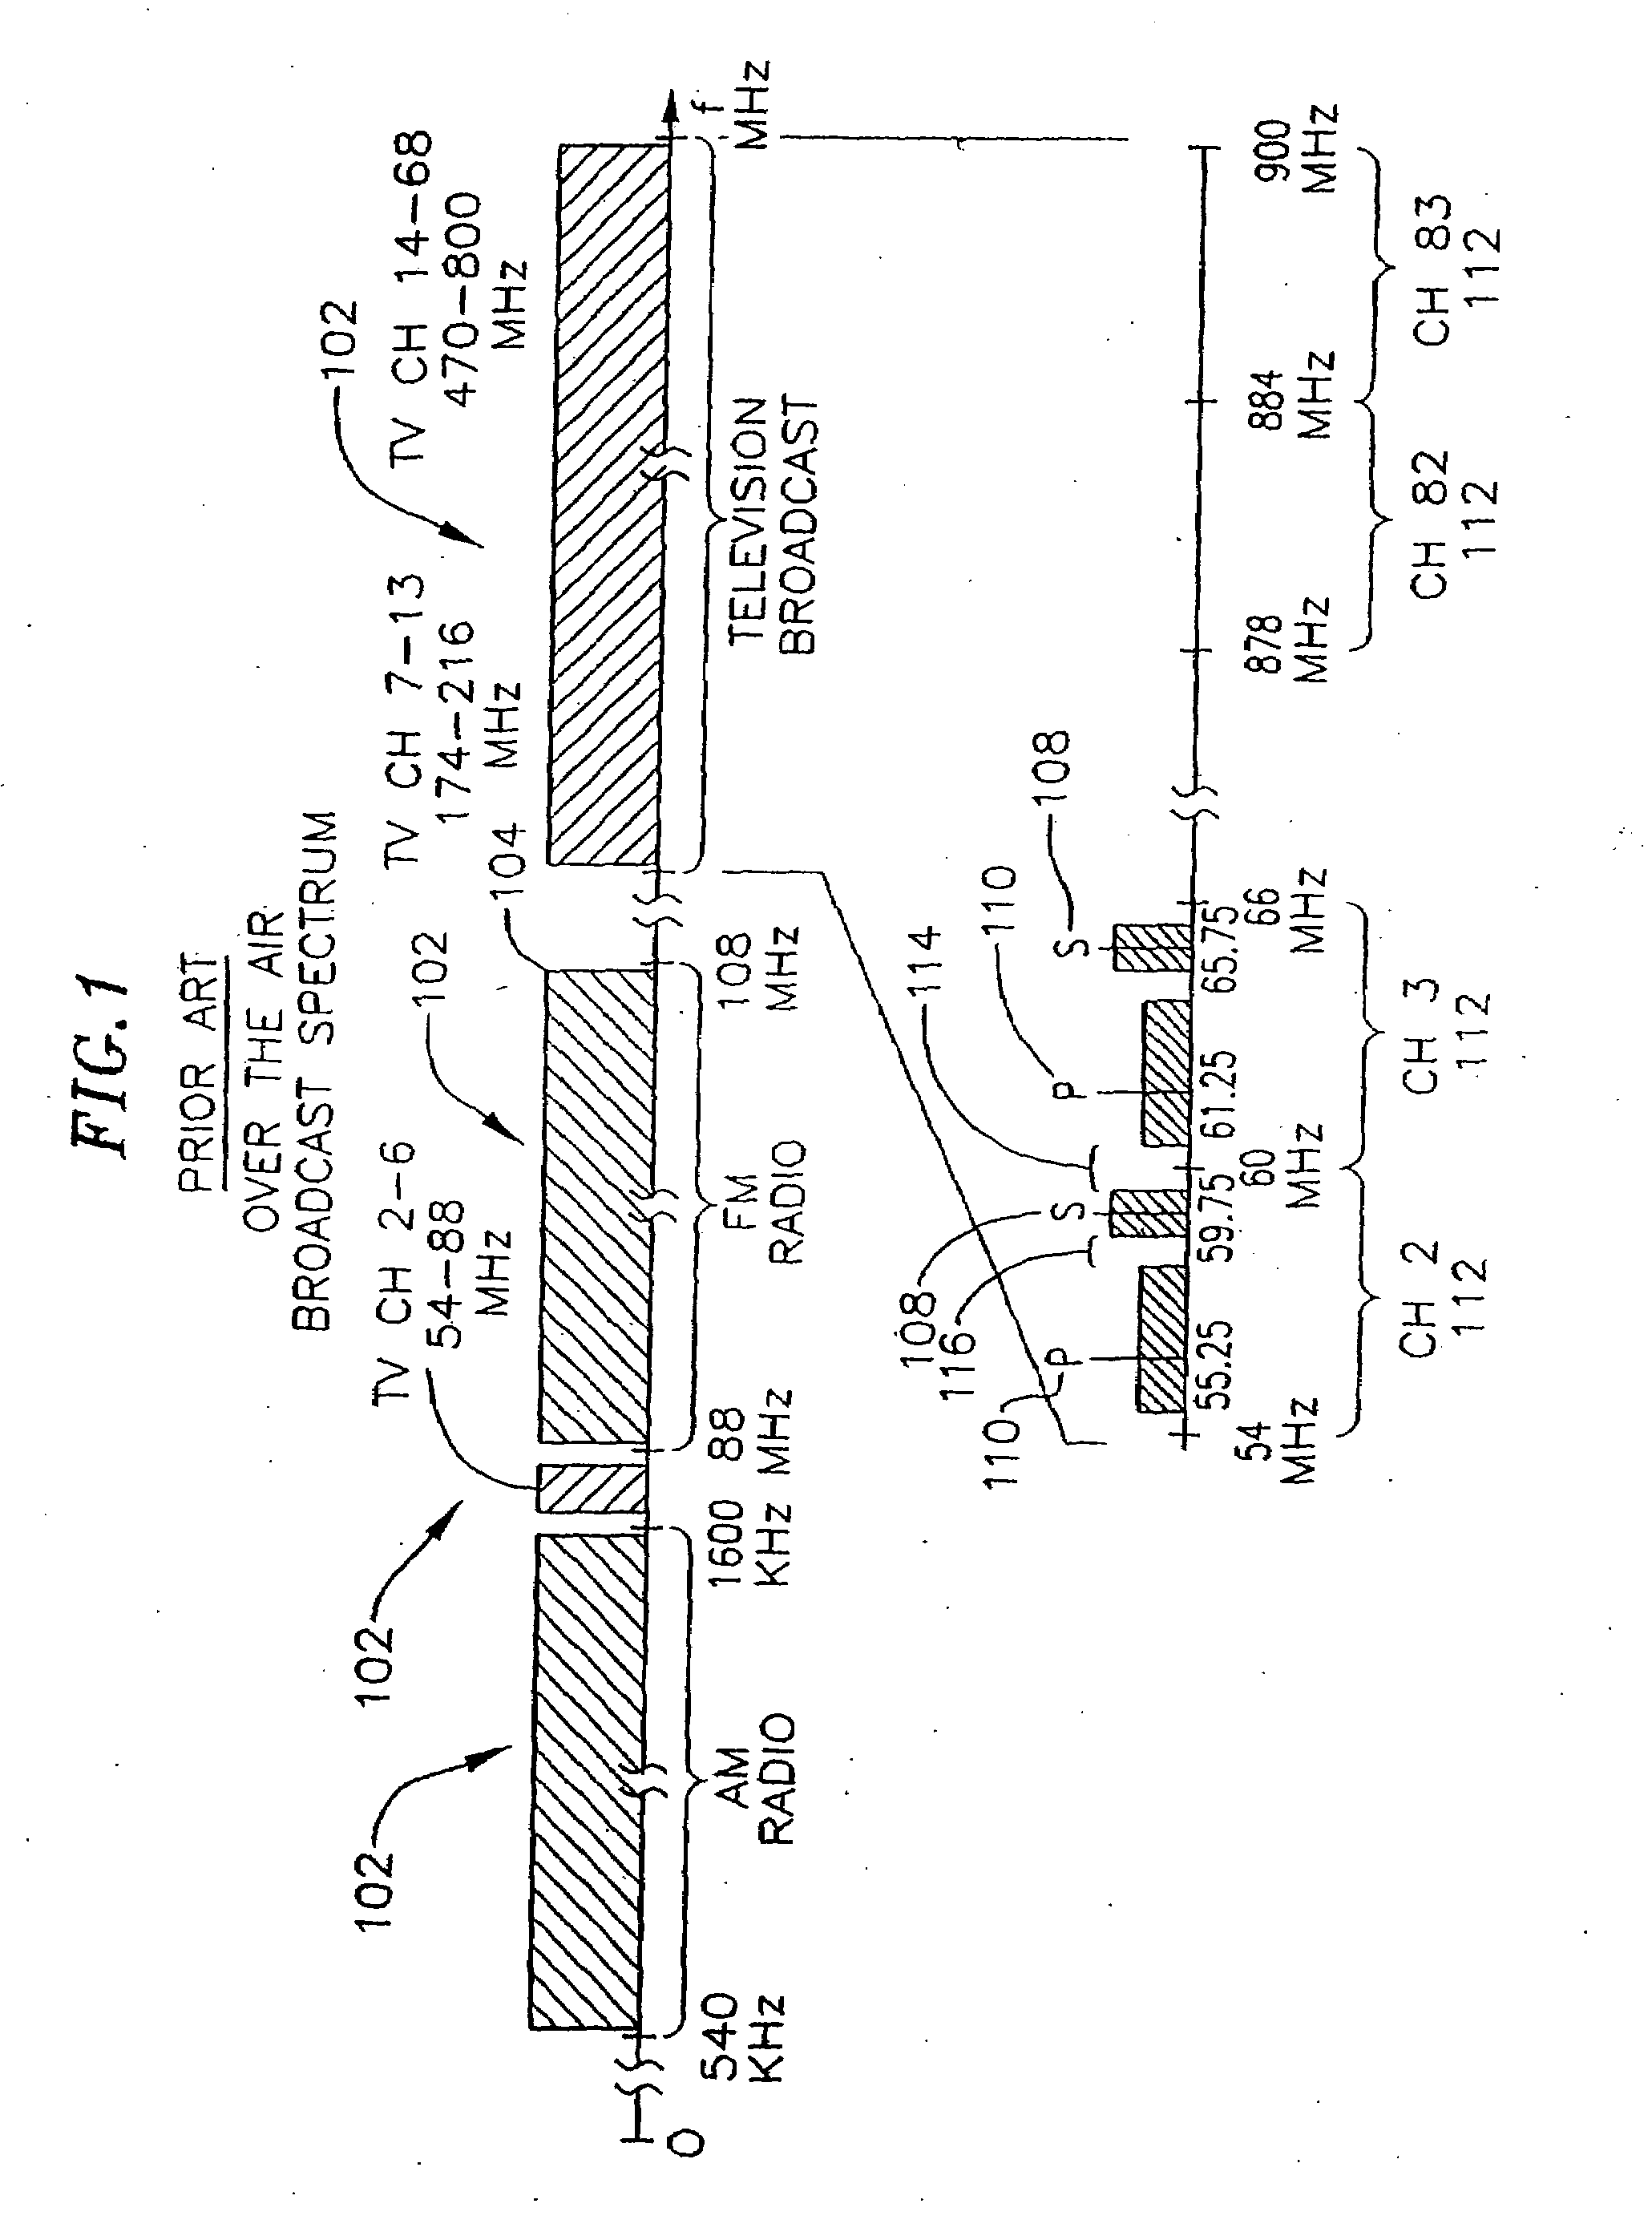 System and method for ESD protection